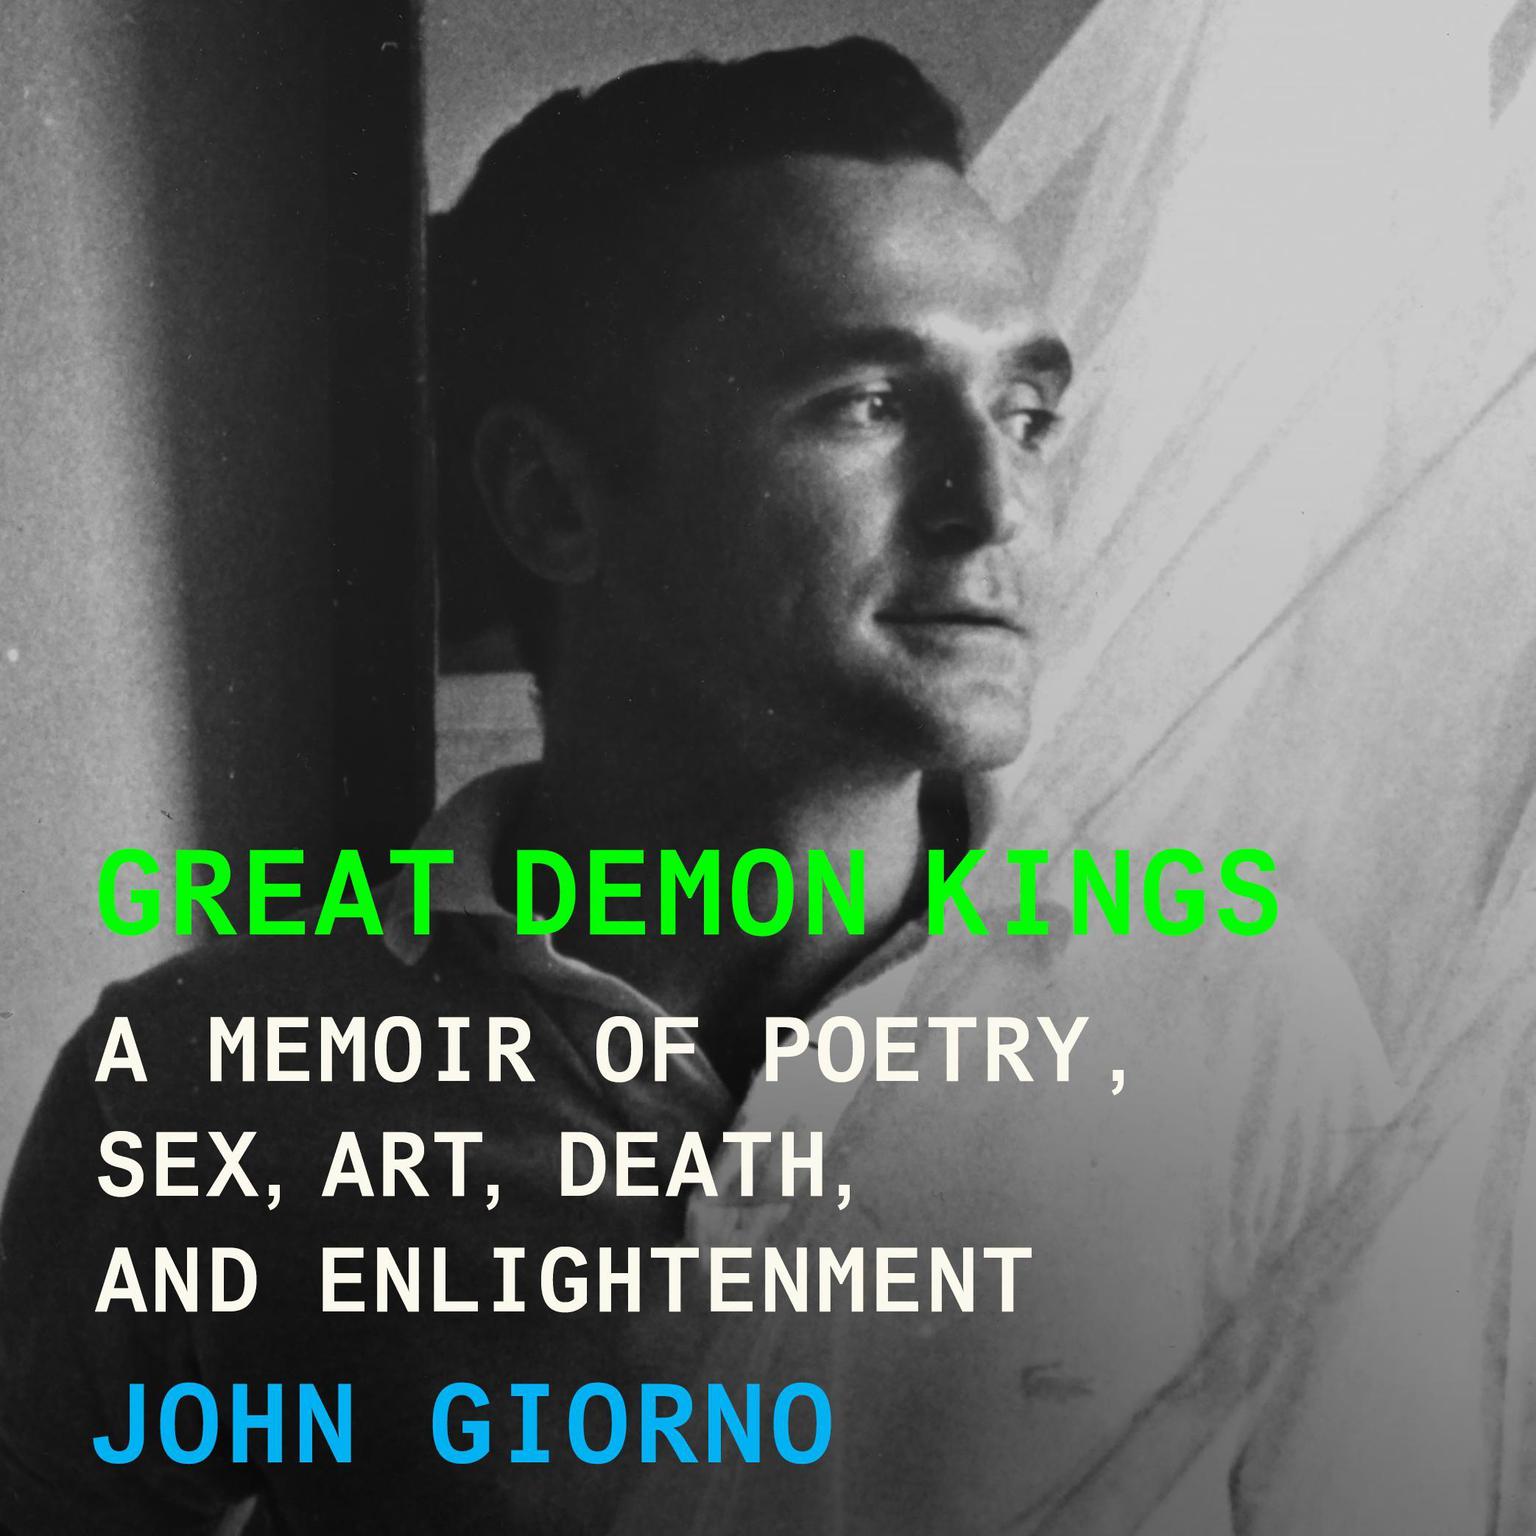 Great Demon Kings: A Memoir of Poetry, Sex, Art, Death, and Enlightenment Audiobook, by John Giorno